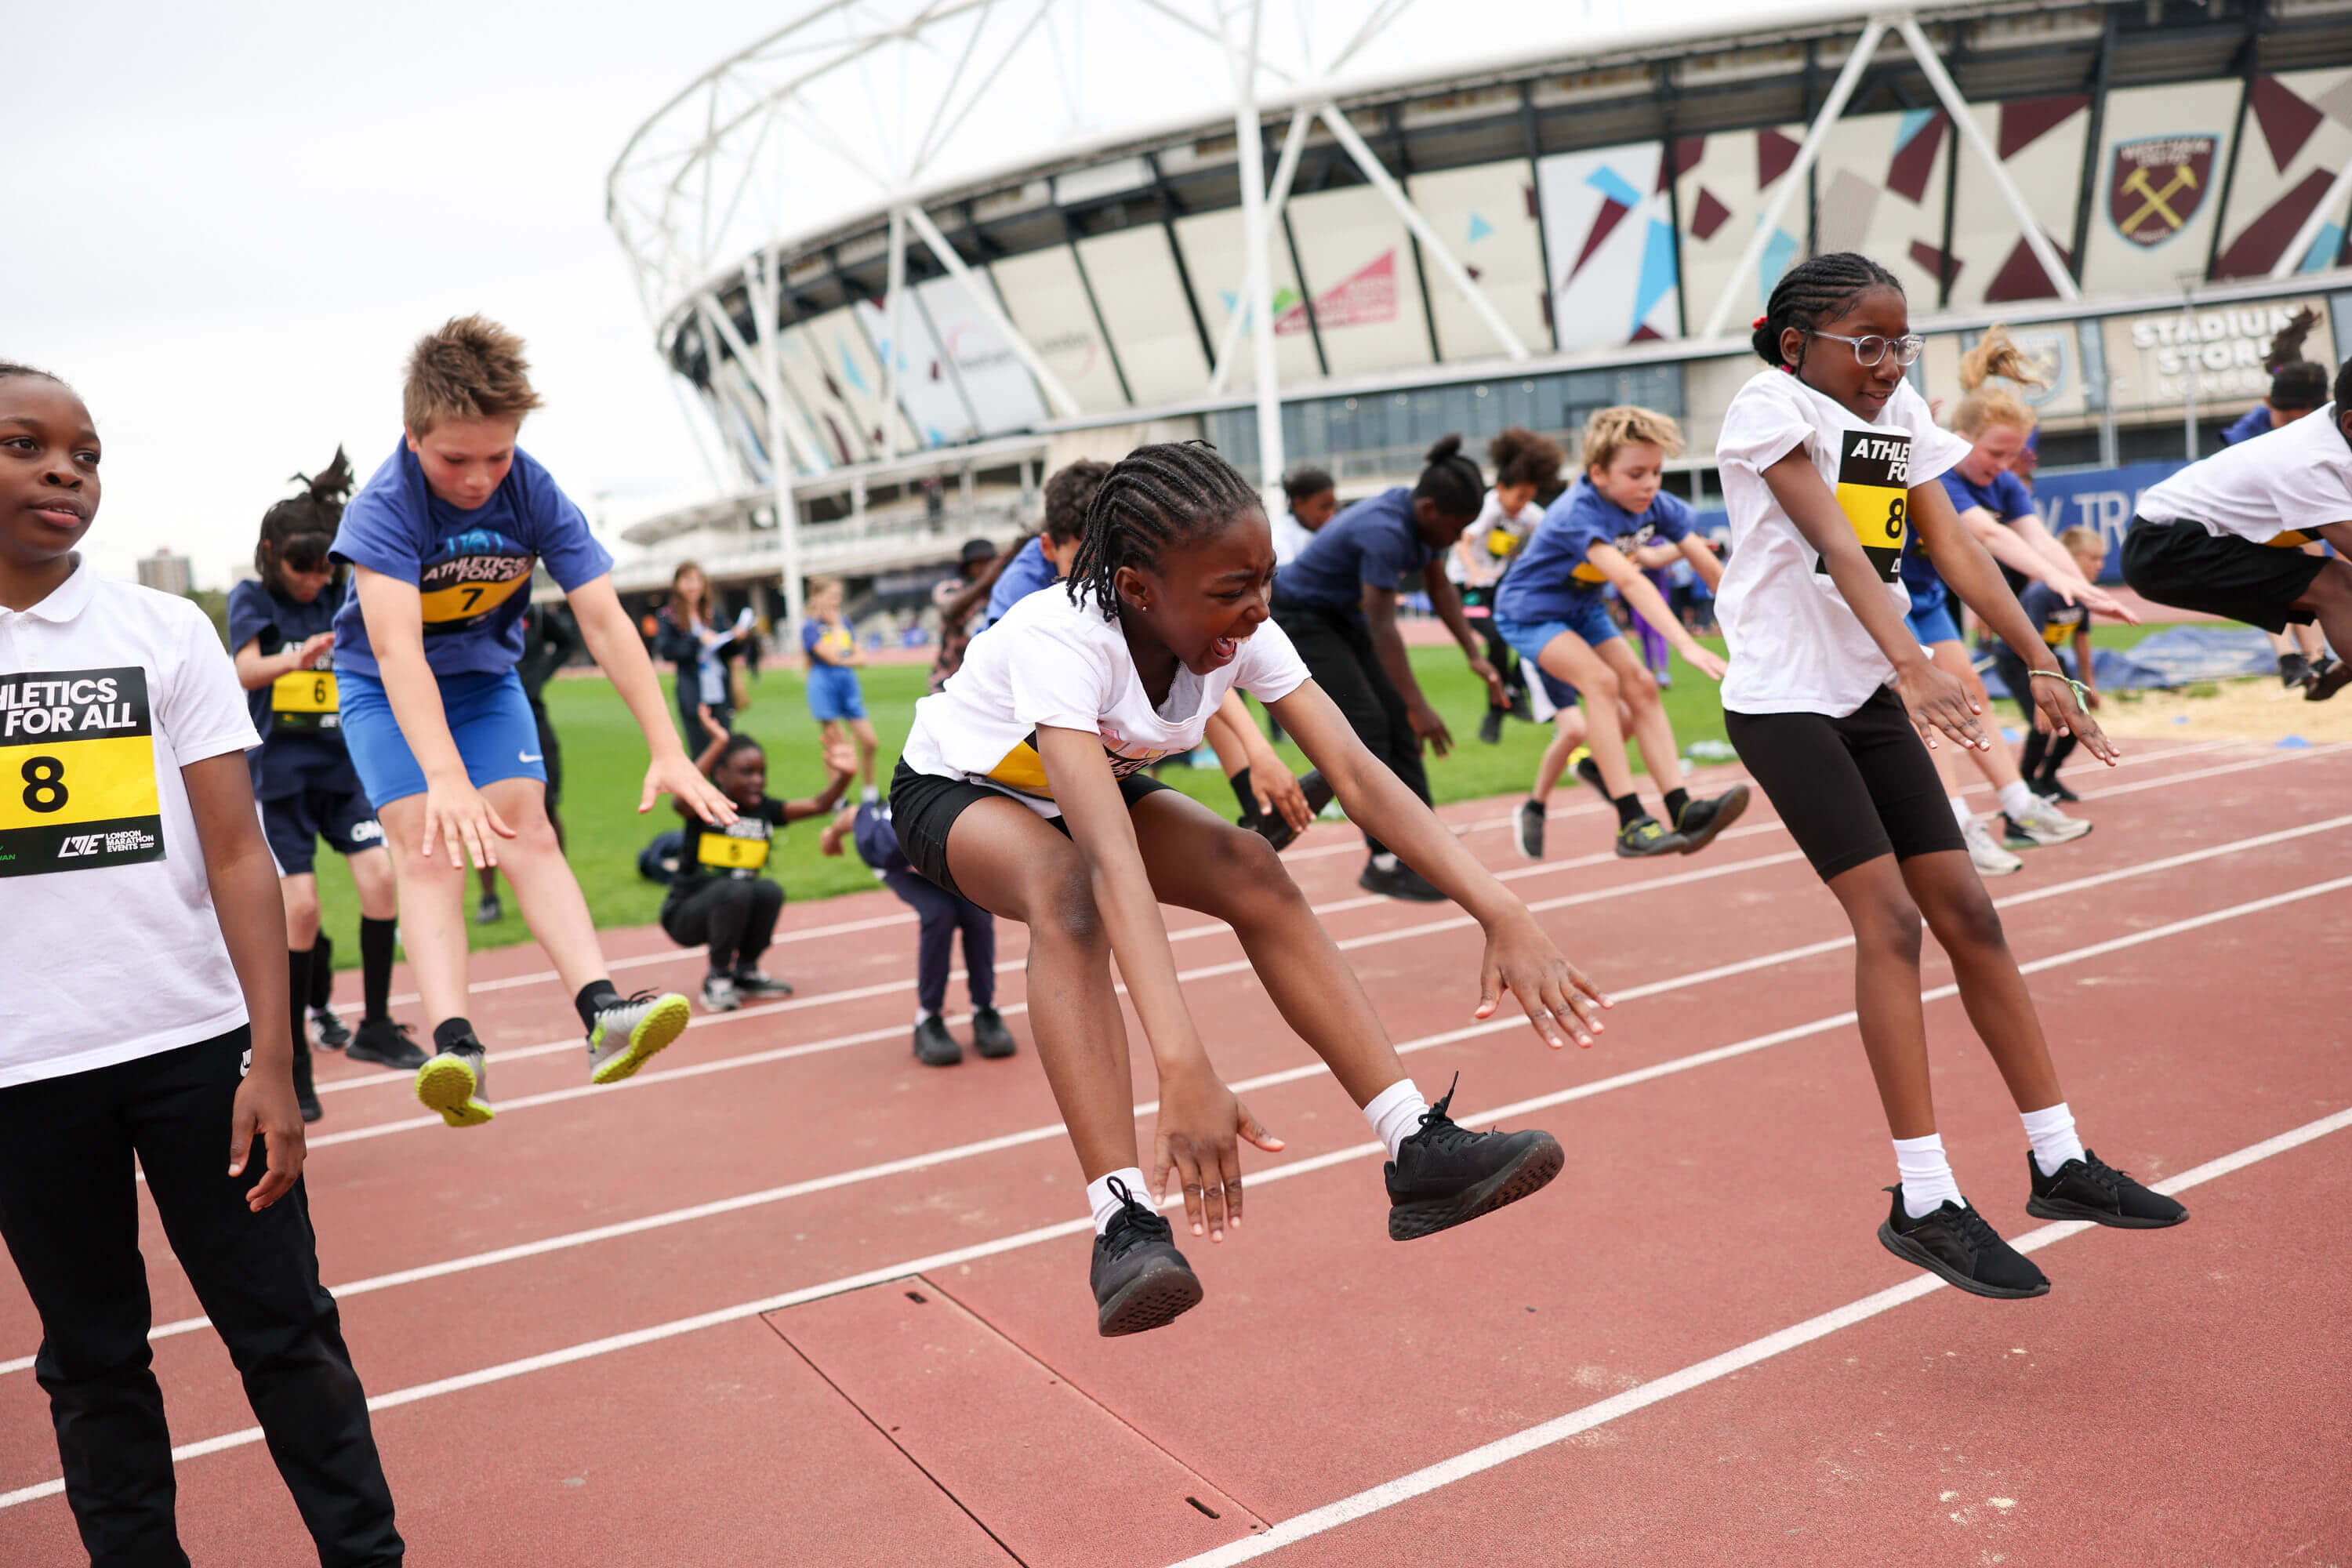 Jumping children at the Athletics for All event